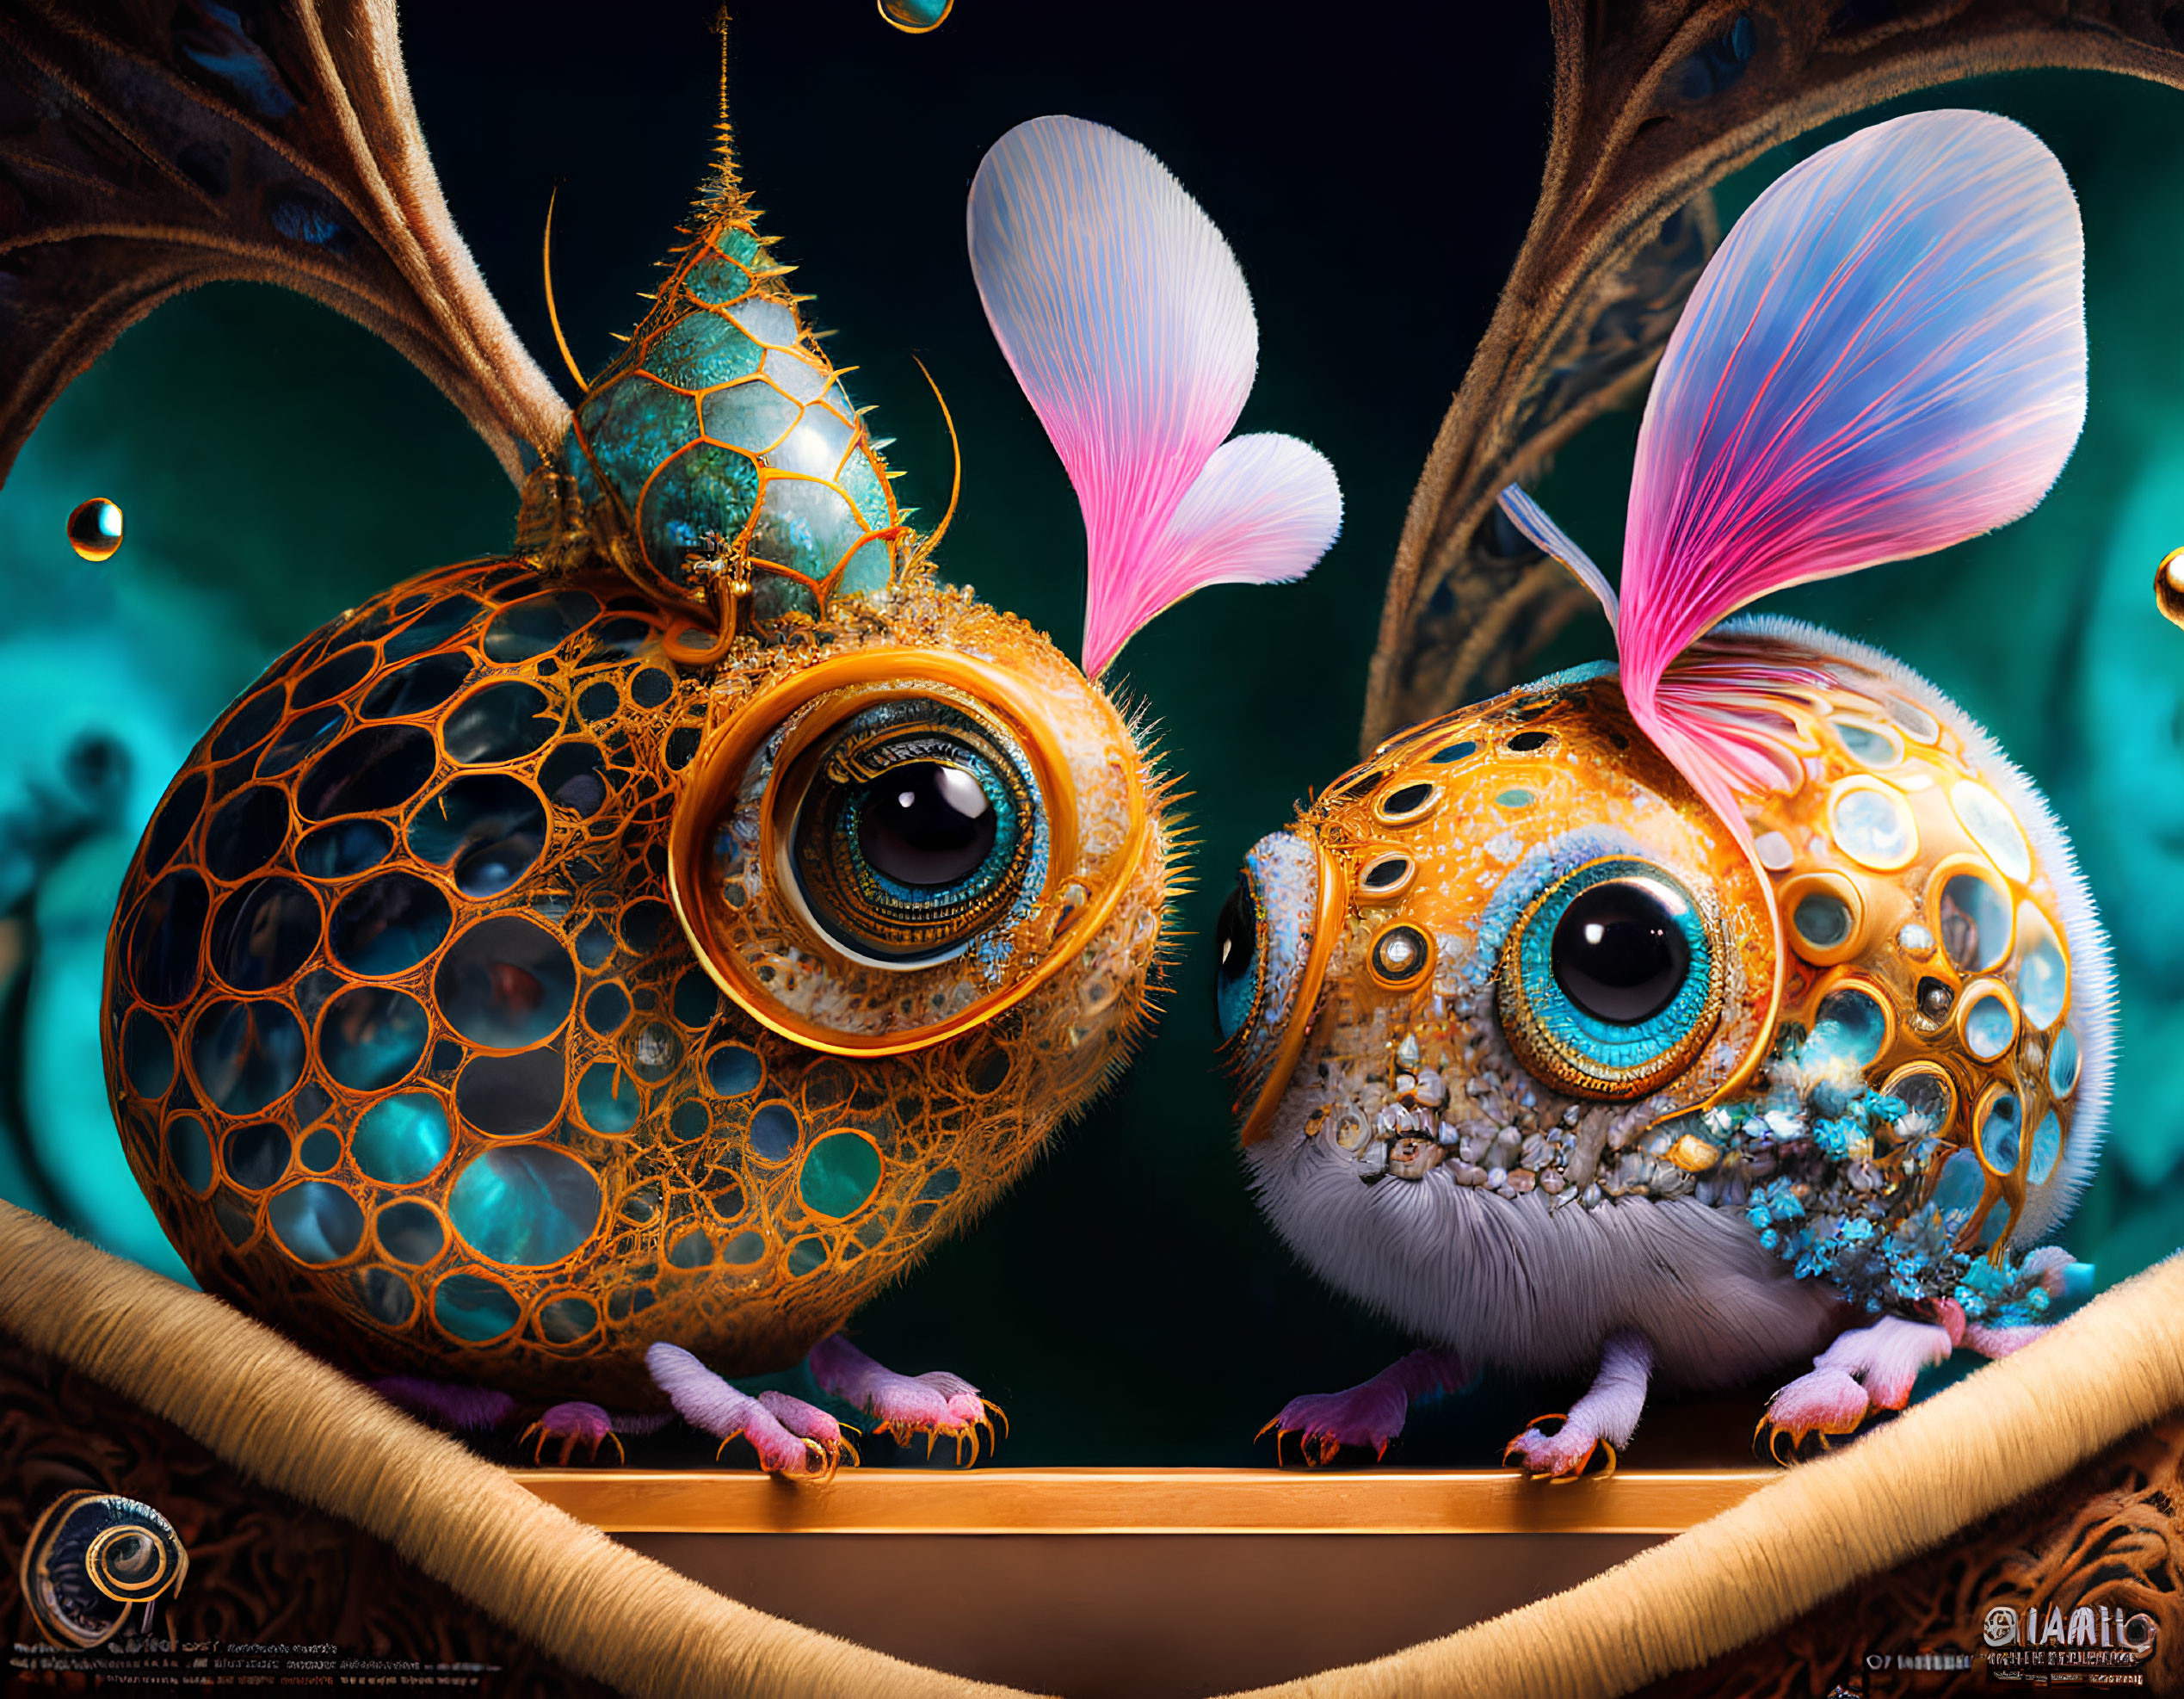 Whimsical fantasy creatures with expressive eyes in surreal setting